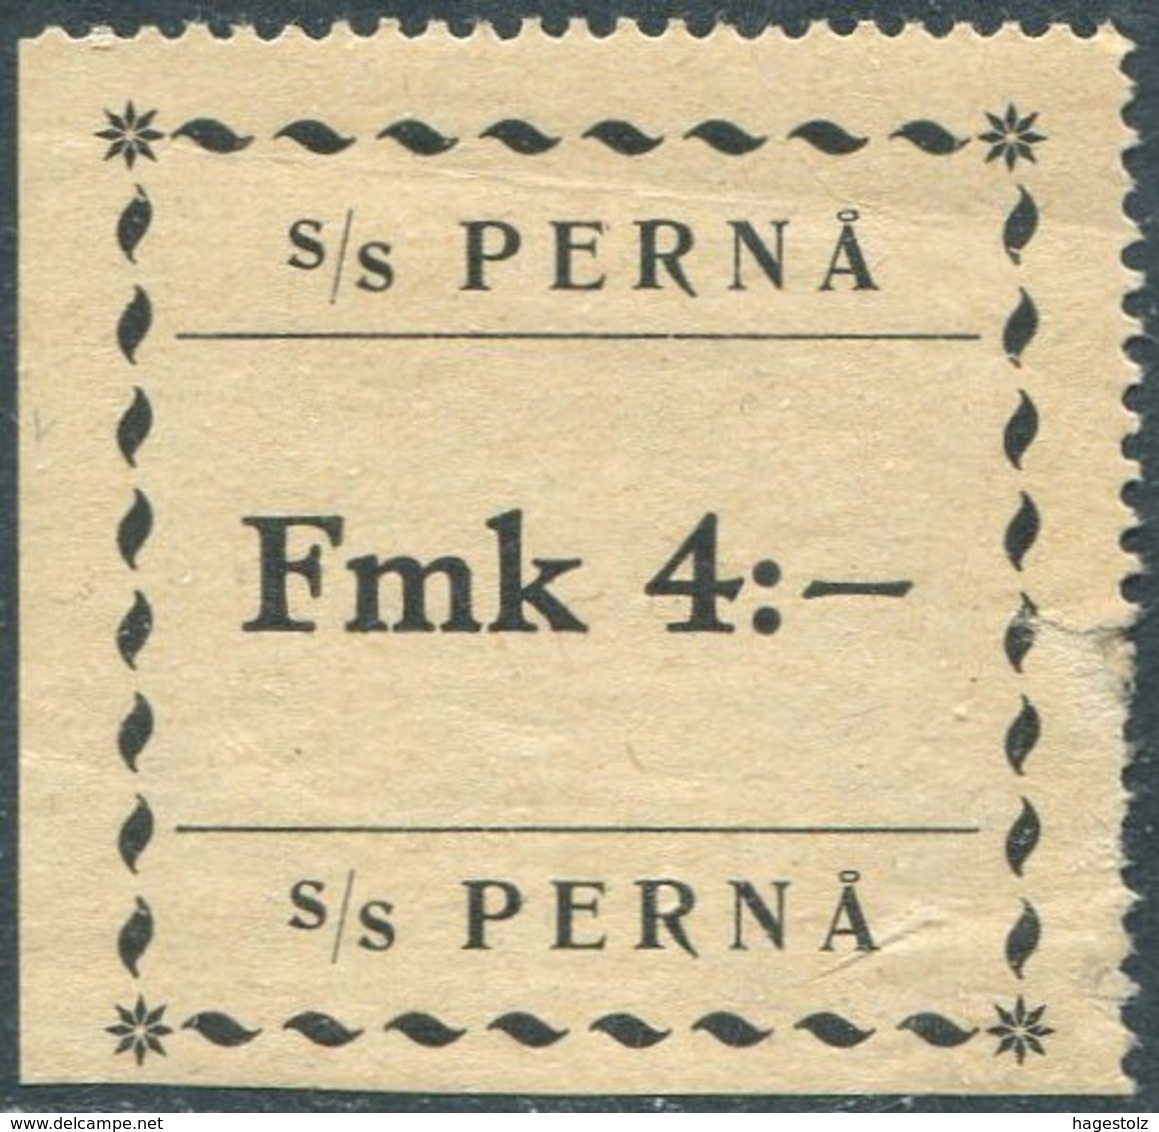 Finland 1920 Pernå Shipping Co. 4 Fmk ** Local Parcel Freight Stamp Ship Mail Private Post Schiffspost Paketmarke Colis - Schiffe